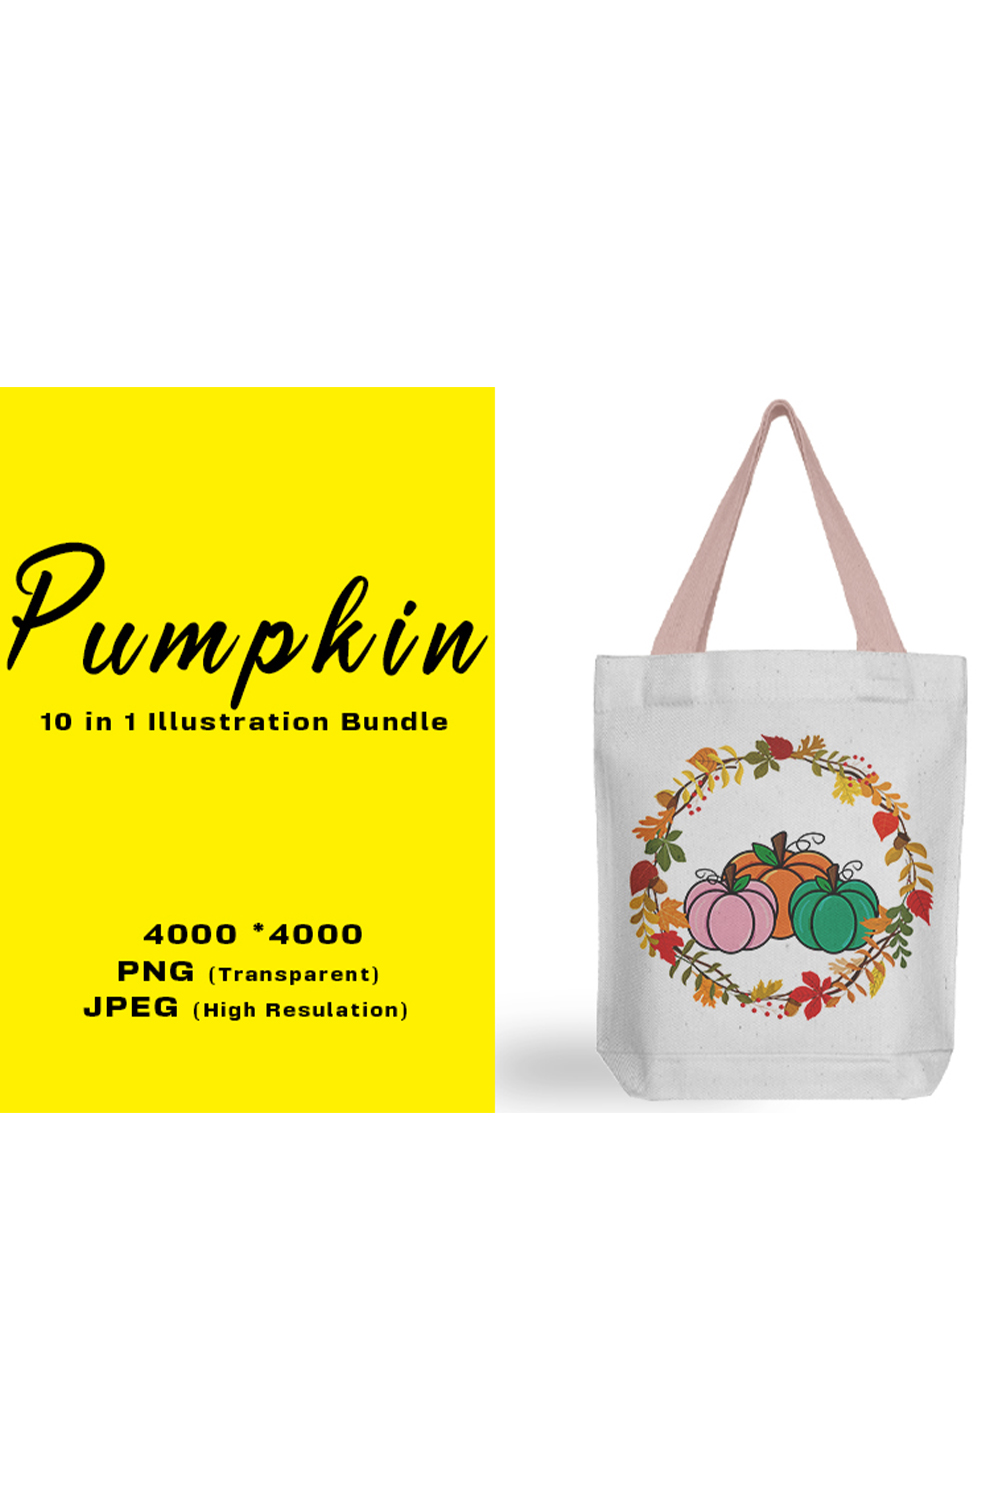 Image of a bag with a beautiful print with pumpkins